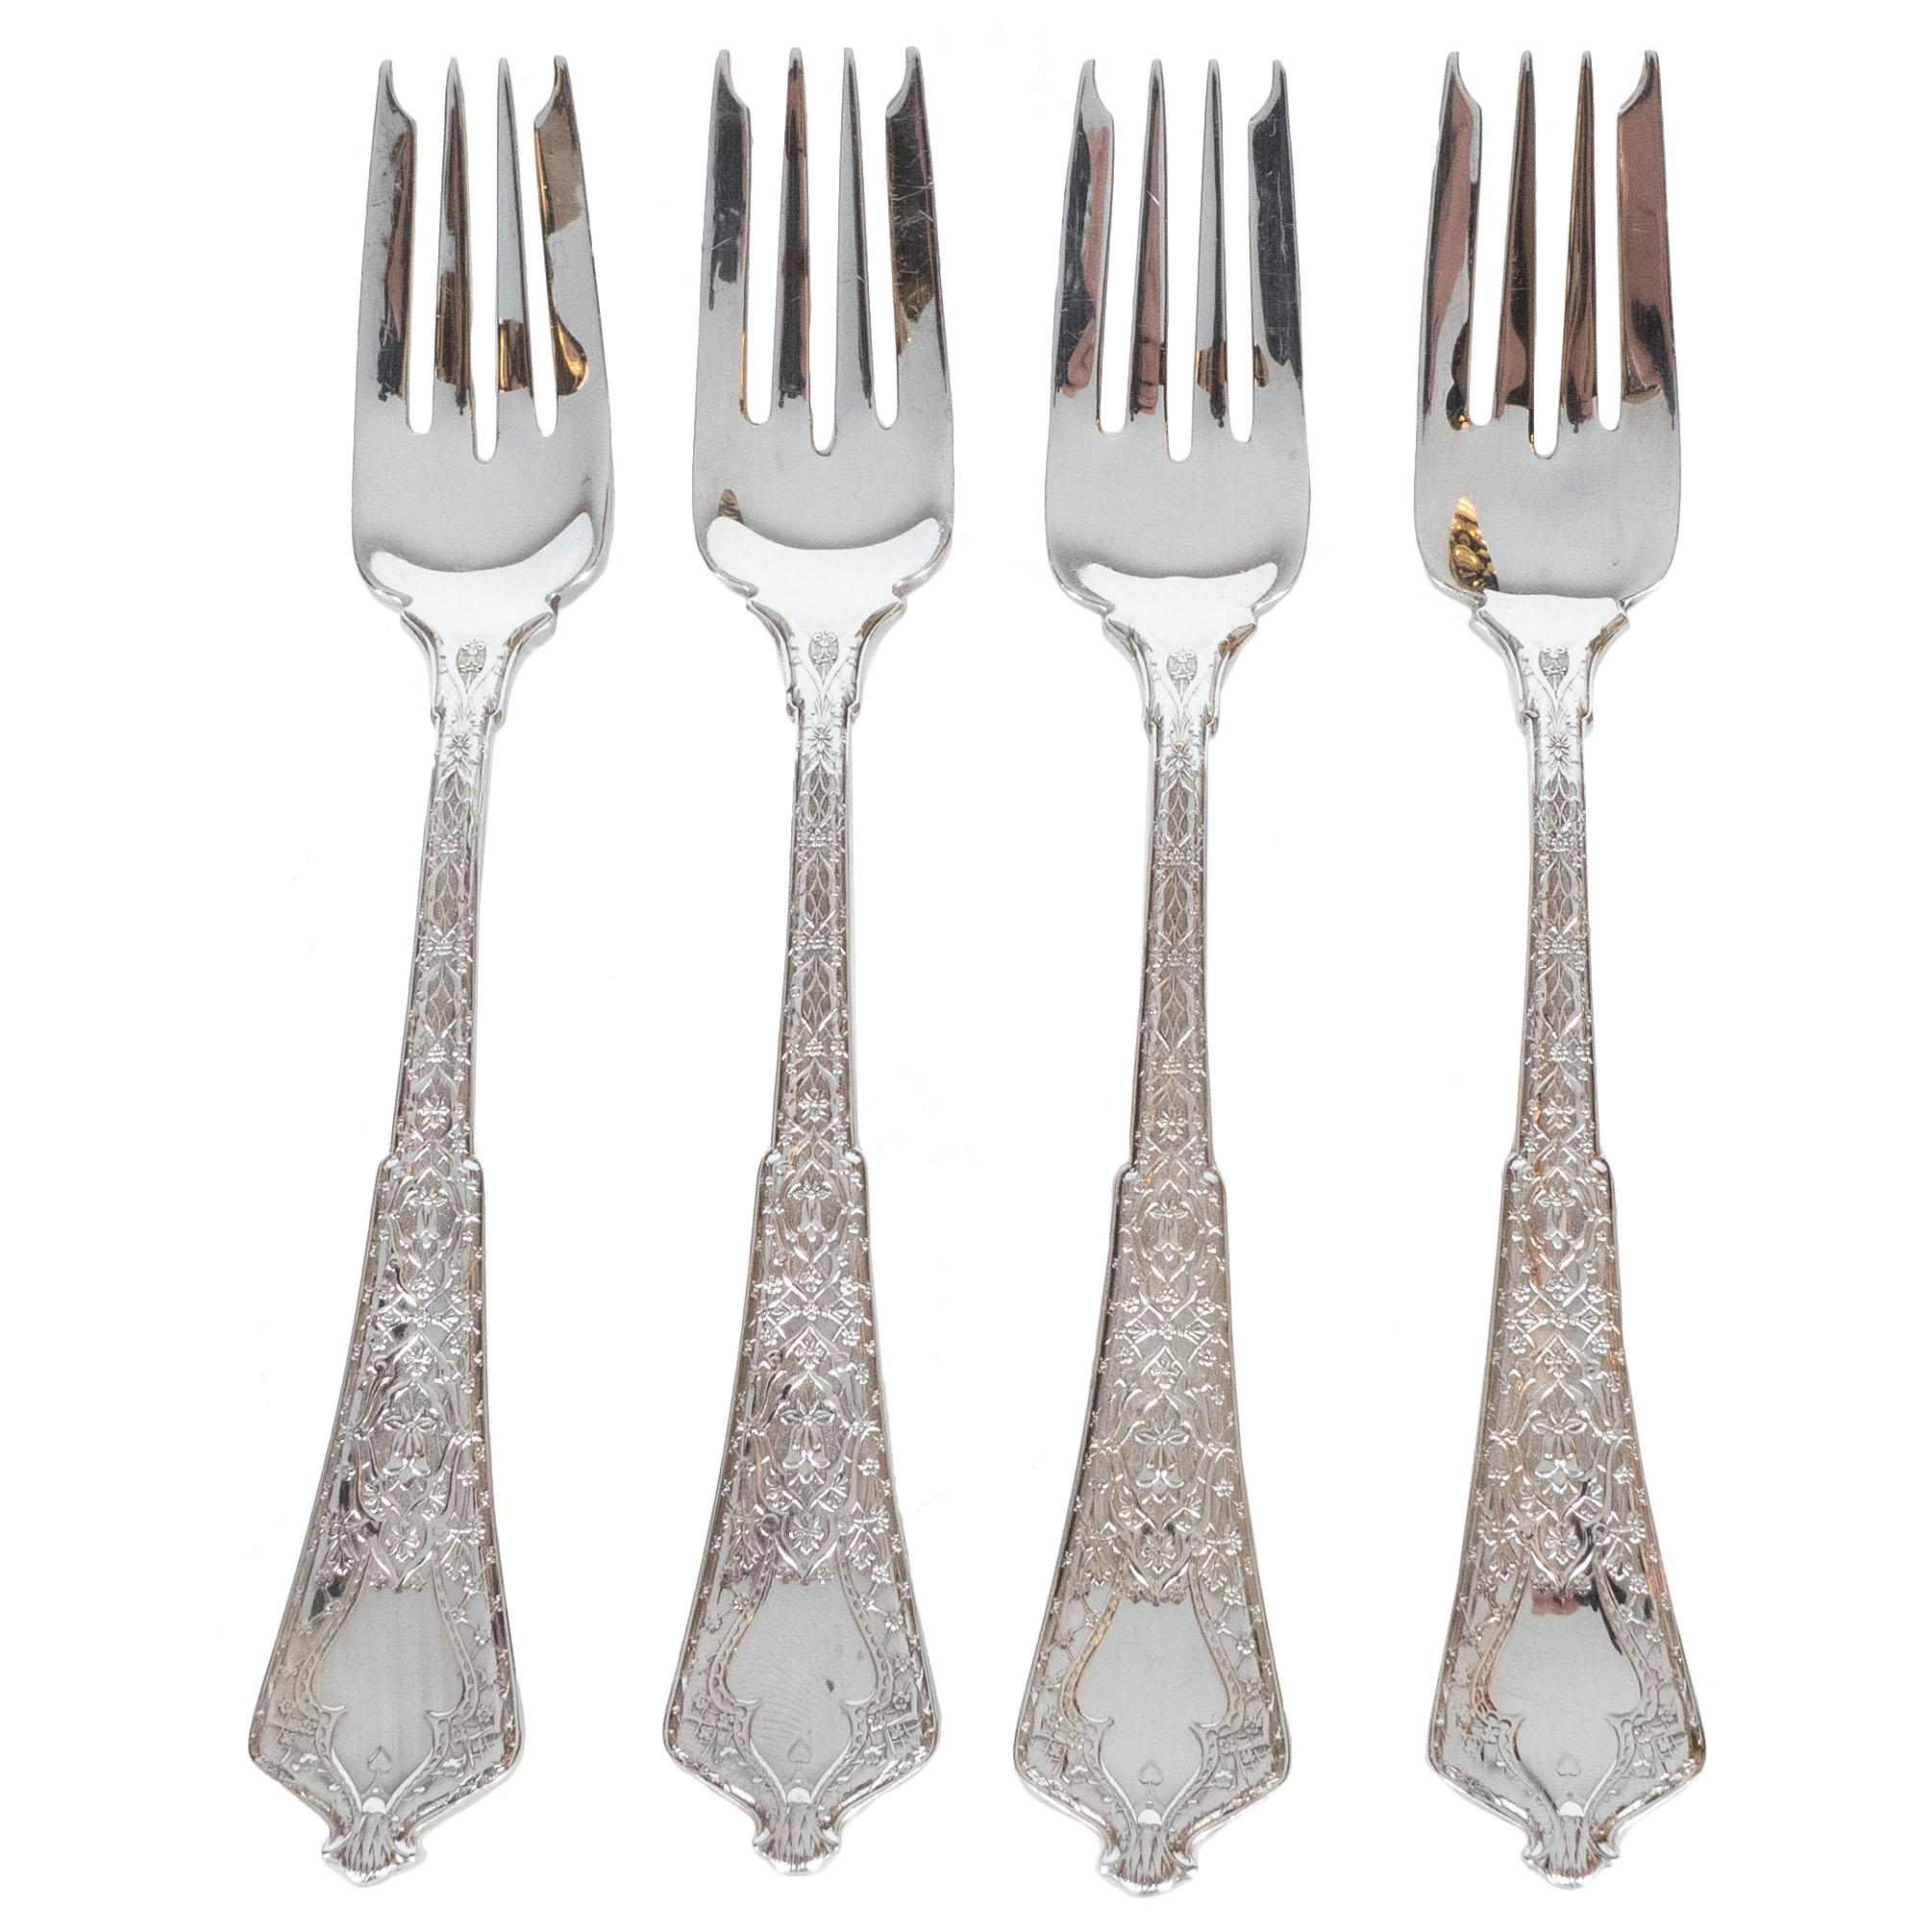 Set of Four Sterling Silver Forks with Arabesque Motif by Tiffany & Co.